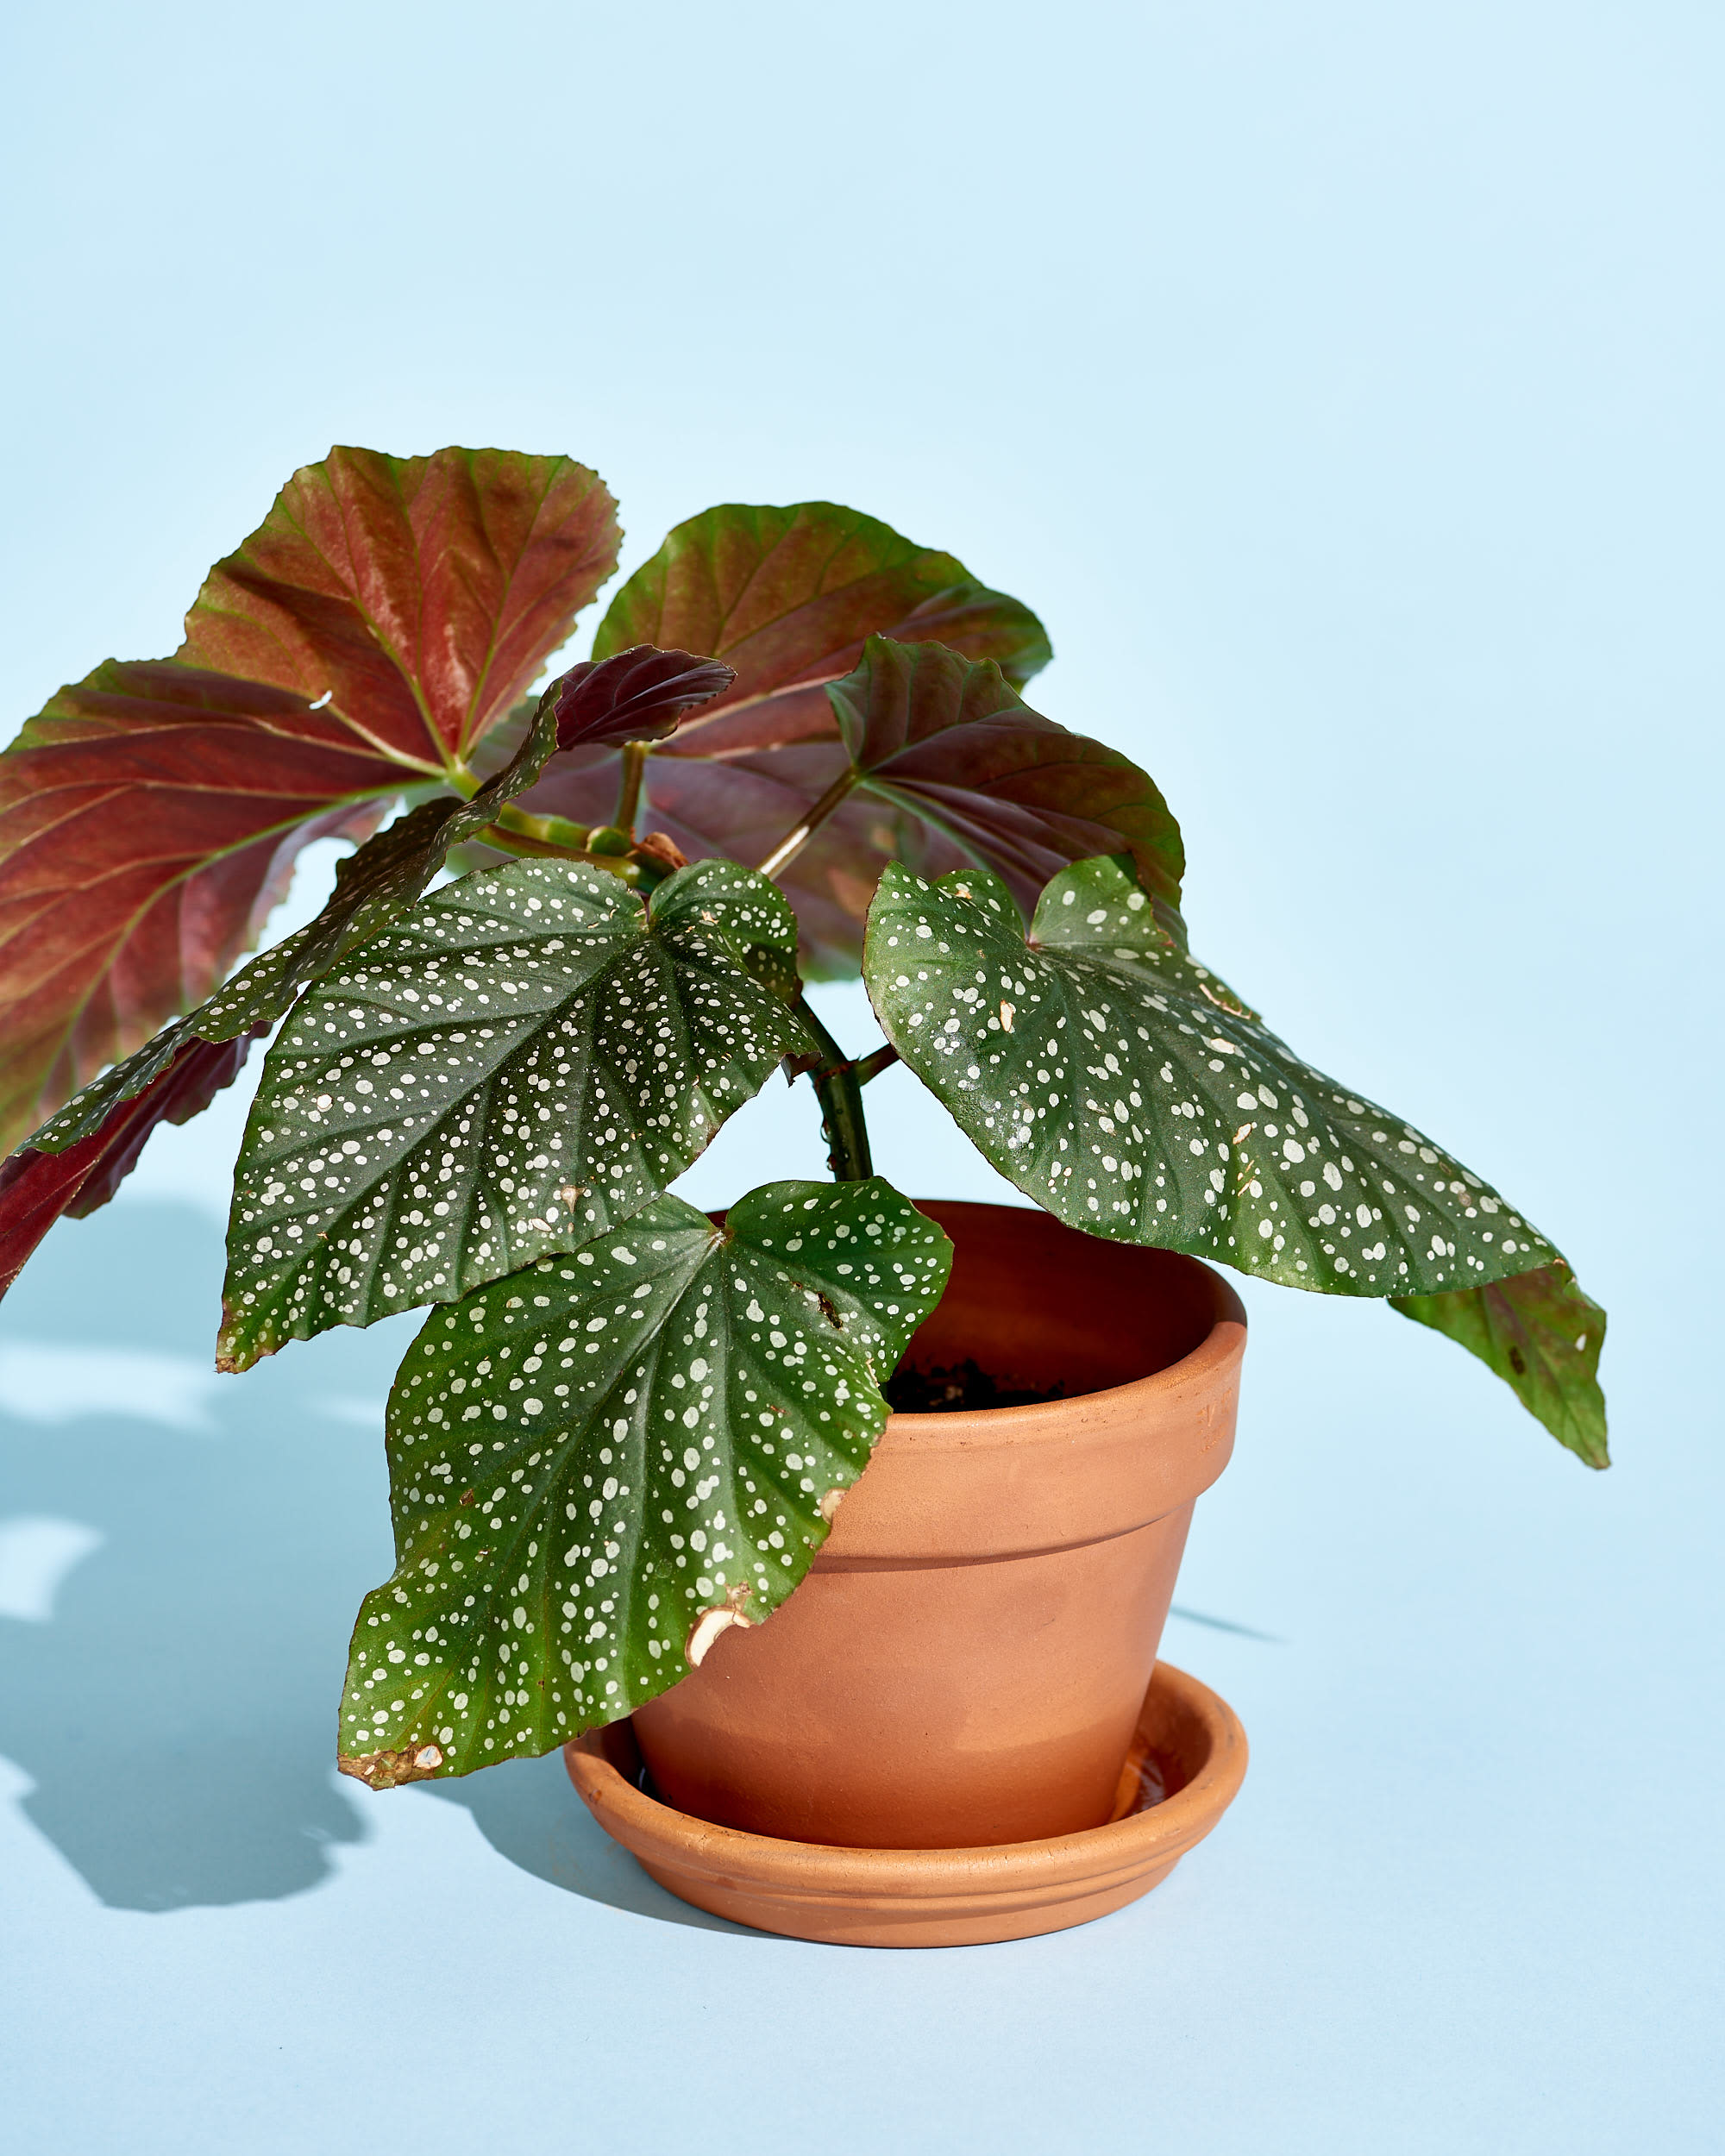 Begonia Plant Care - How to Grow Begonia Plants | Apartment Therapy